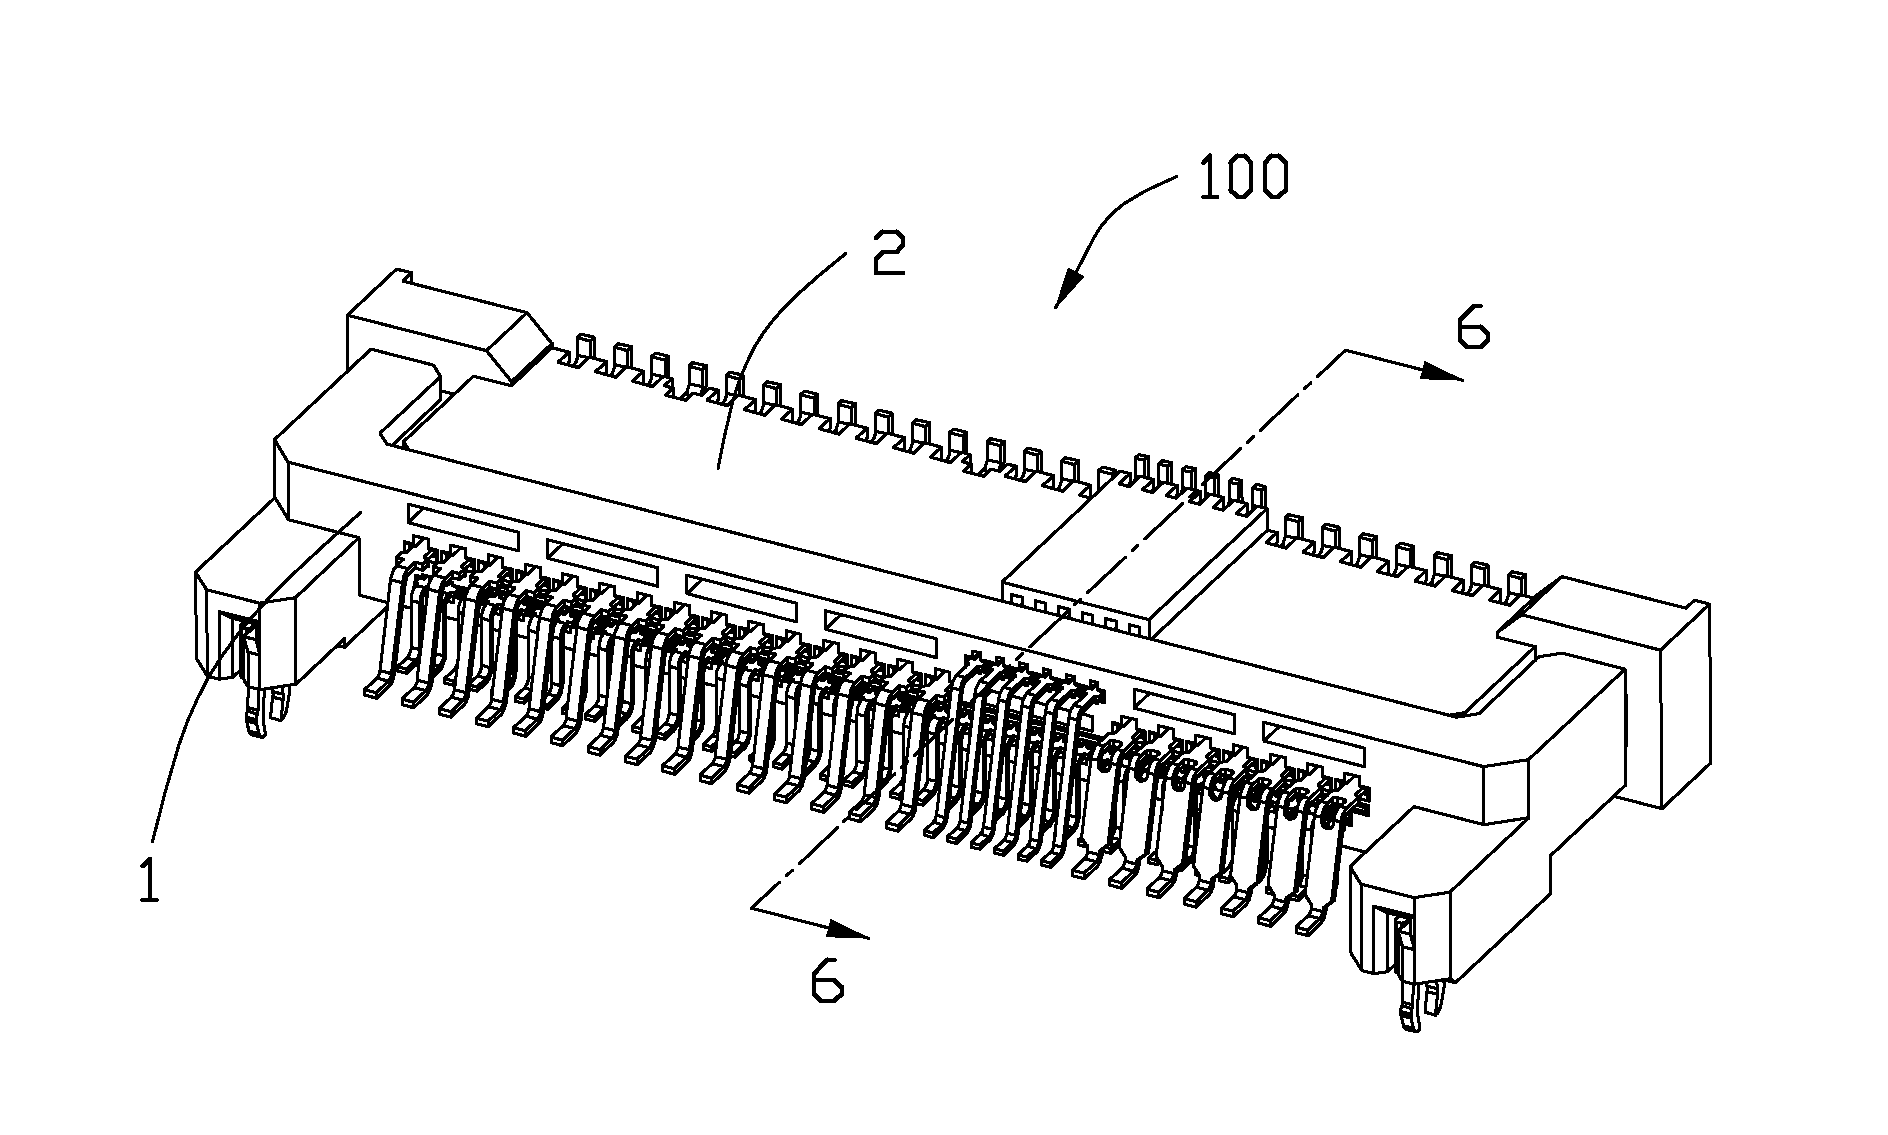 Electrical connector with two grounding bars